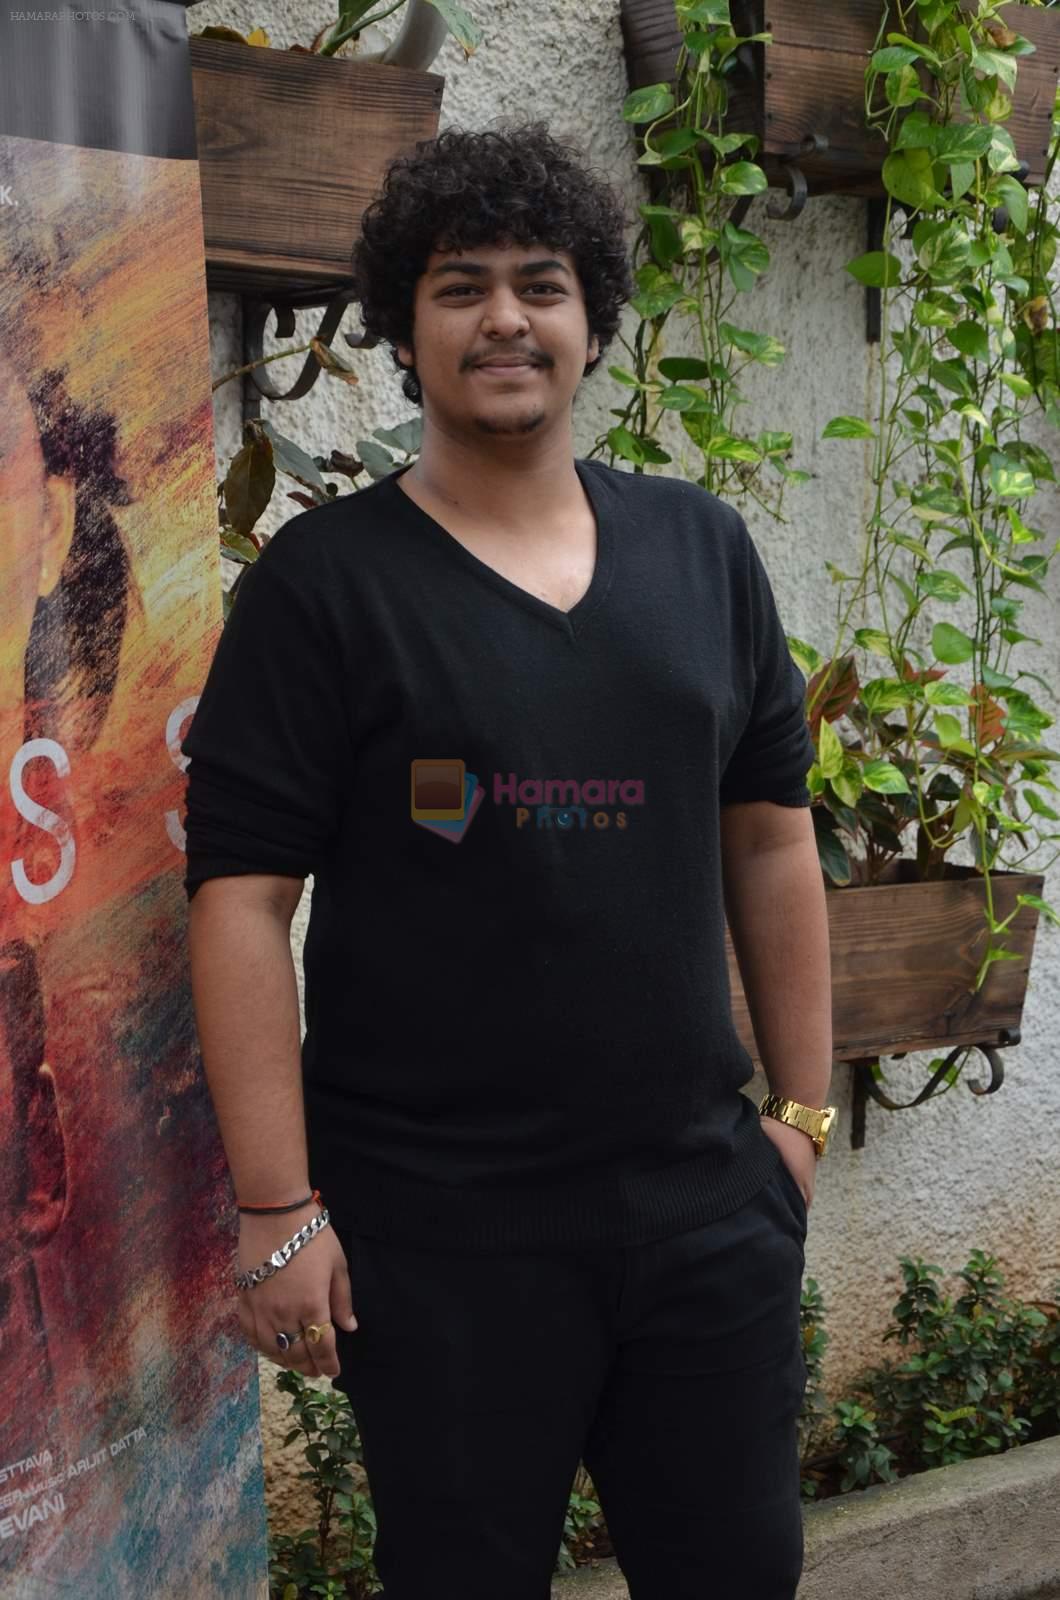 at Fearless film screening in Sunny Super Sound on 11th July 2015